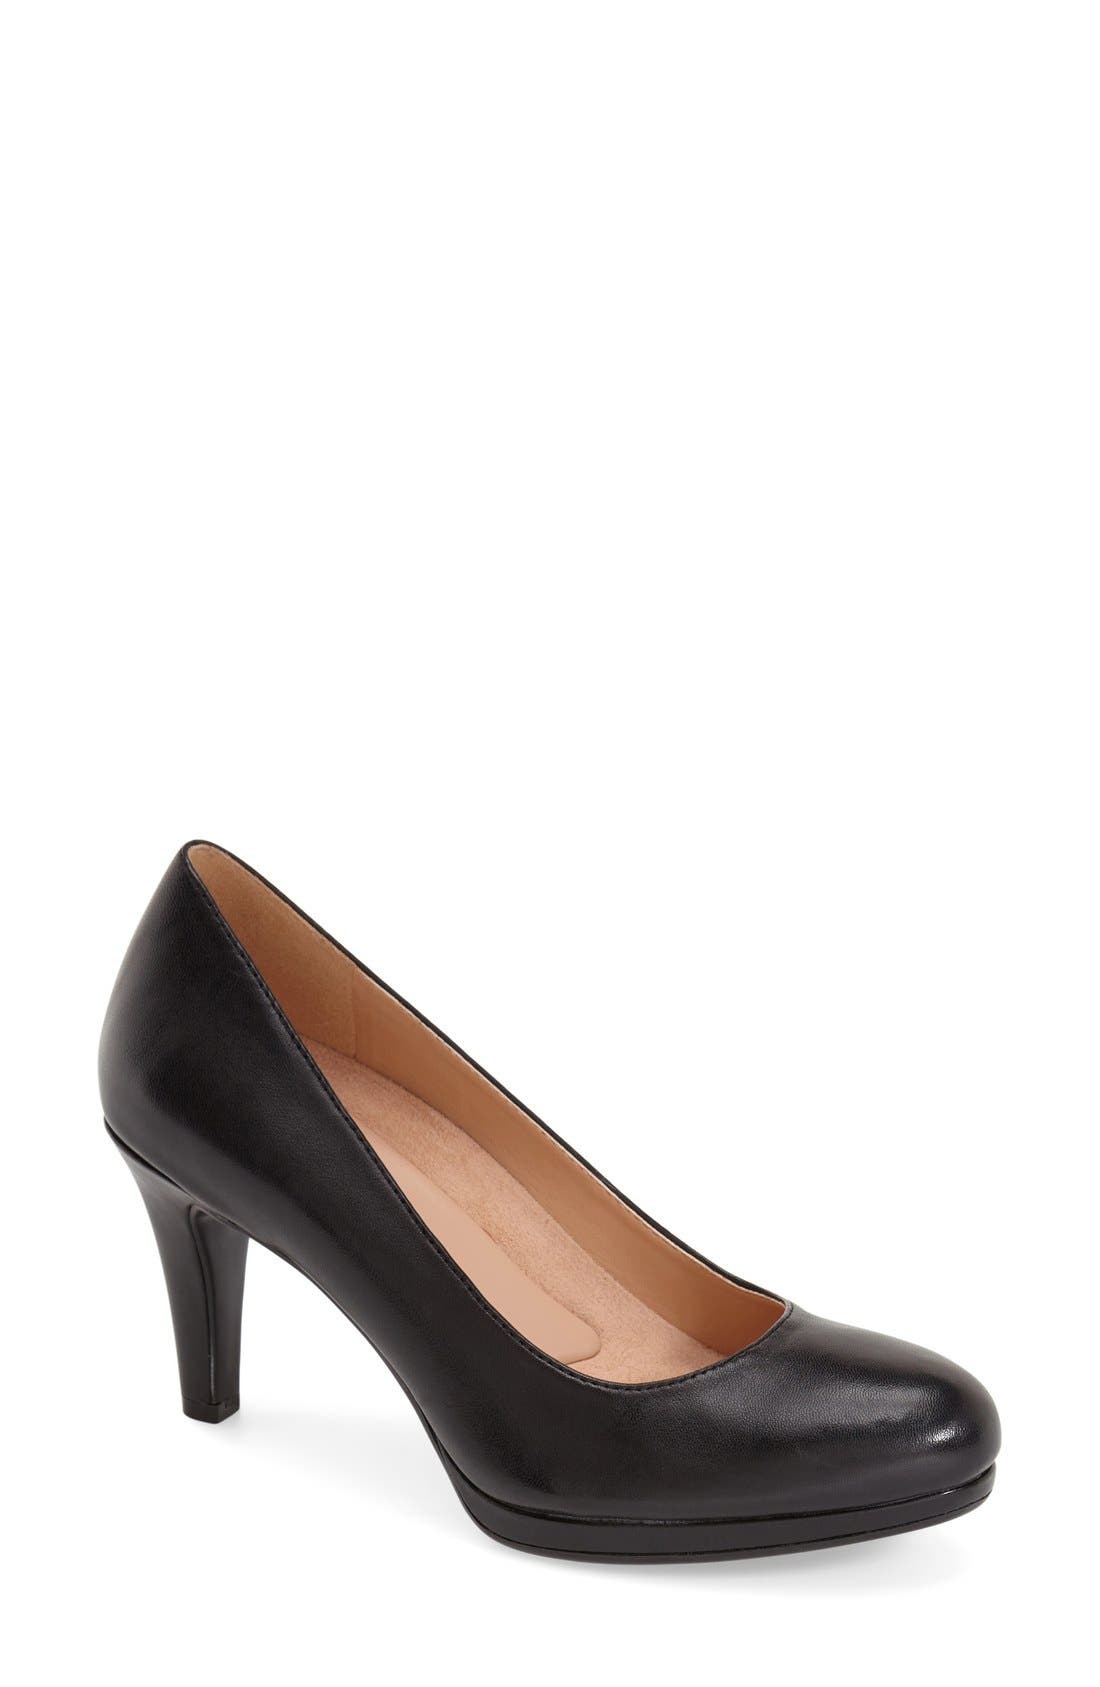 naturalizer michelle pumps red